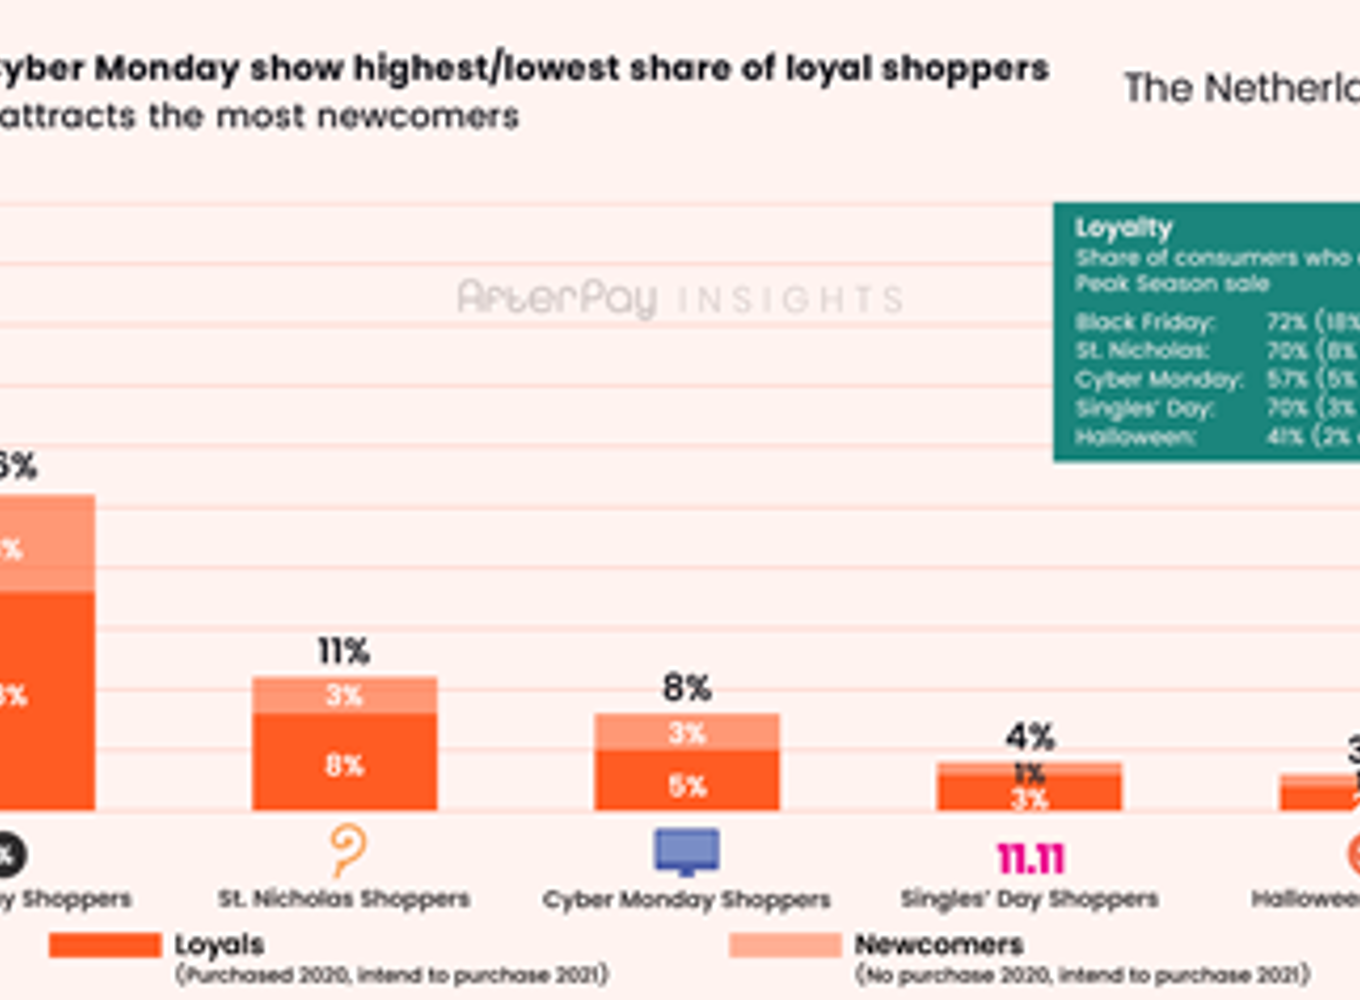 The share of consumers loyal to Peak Season sale.